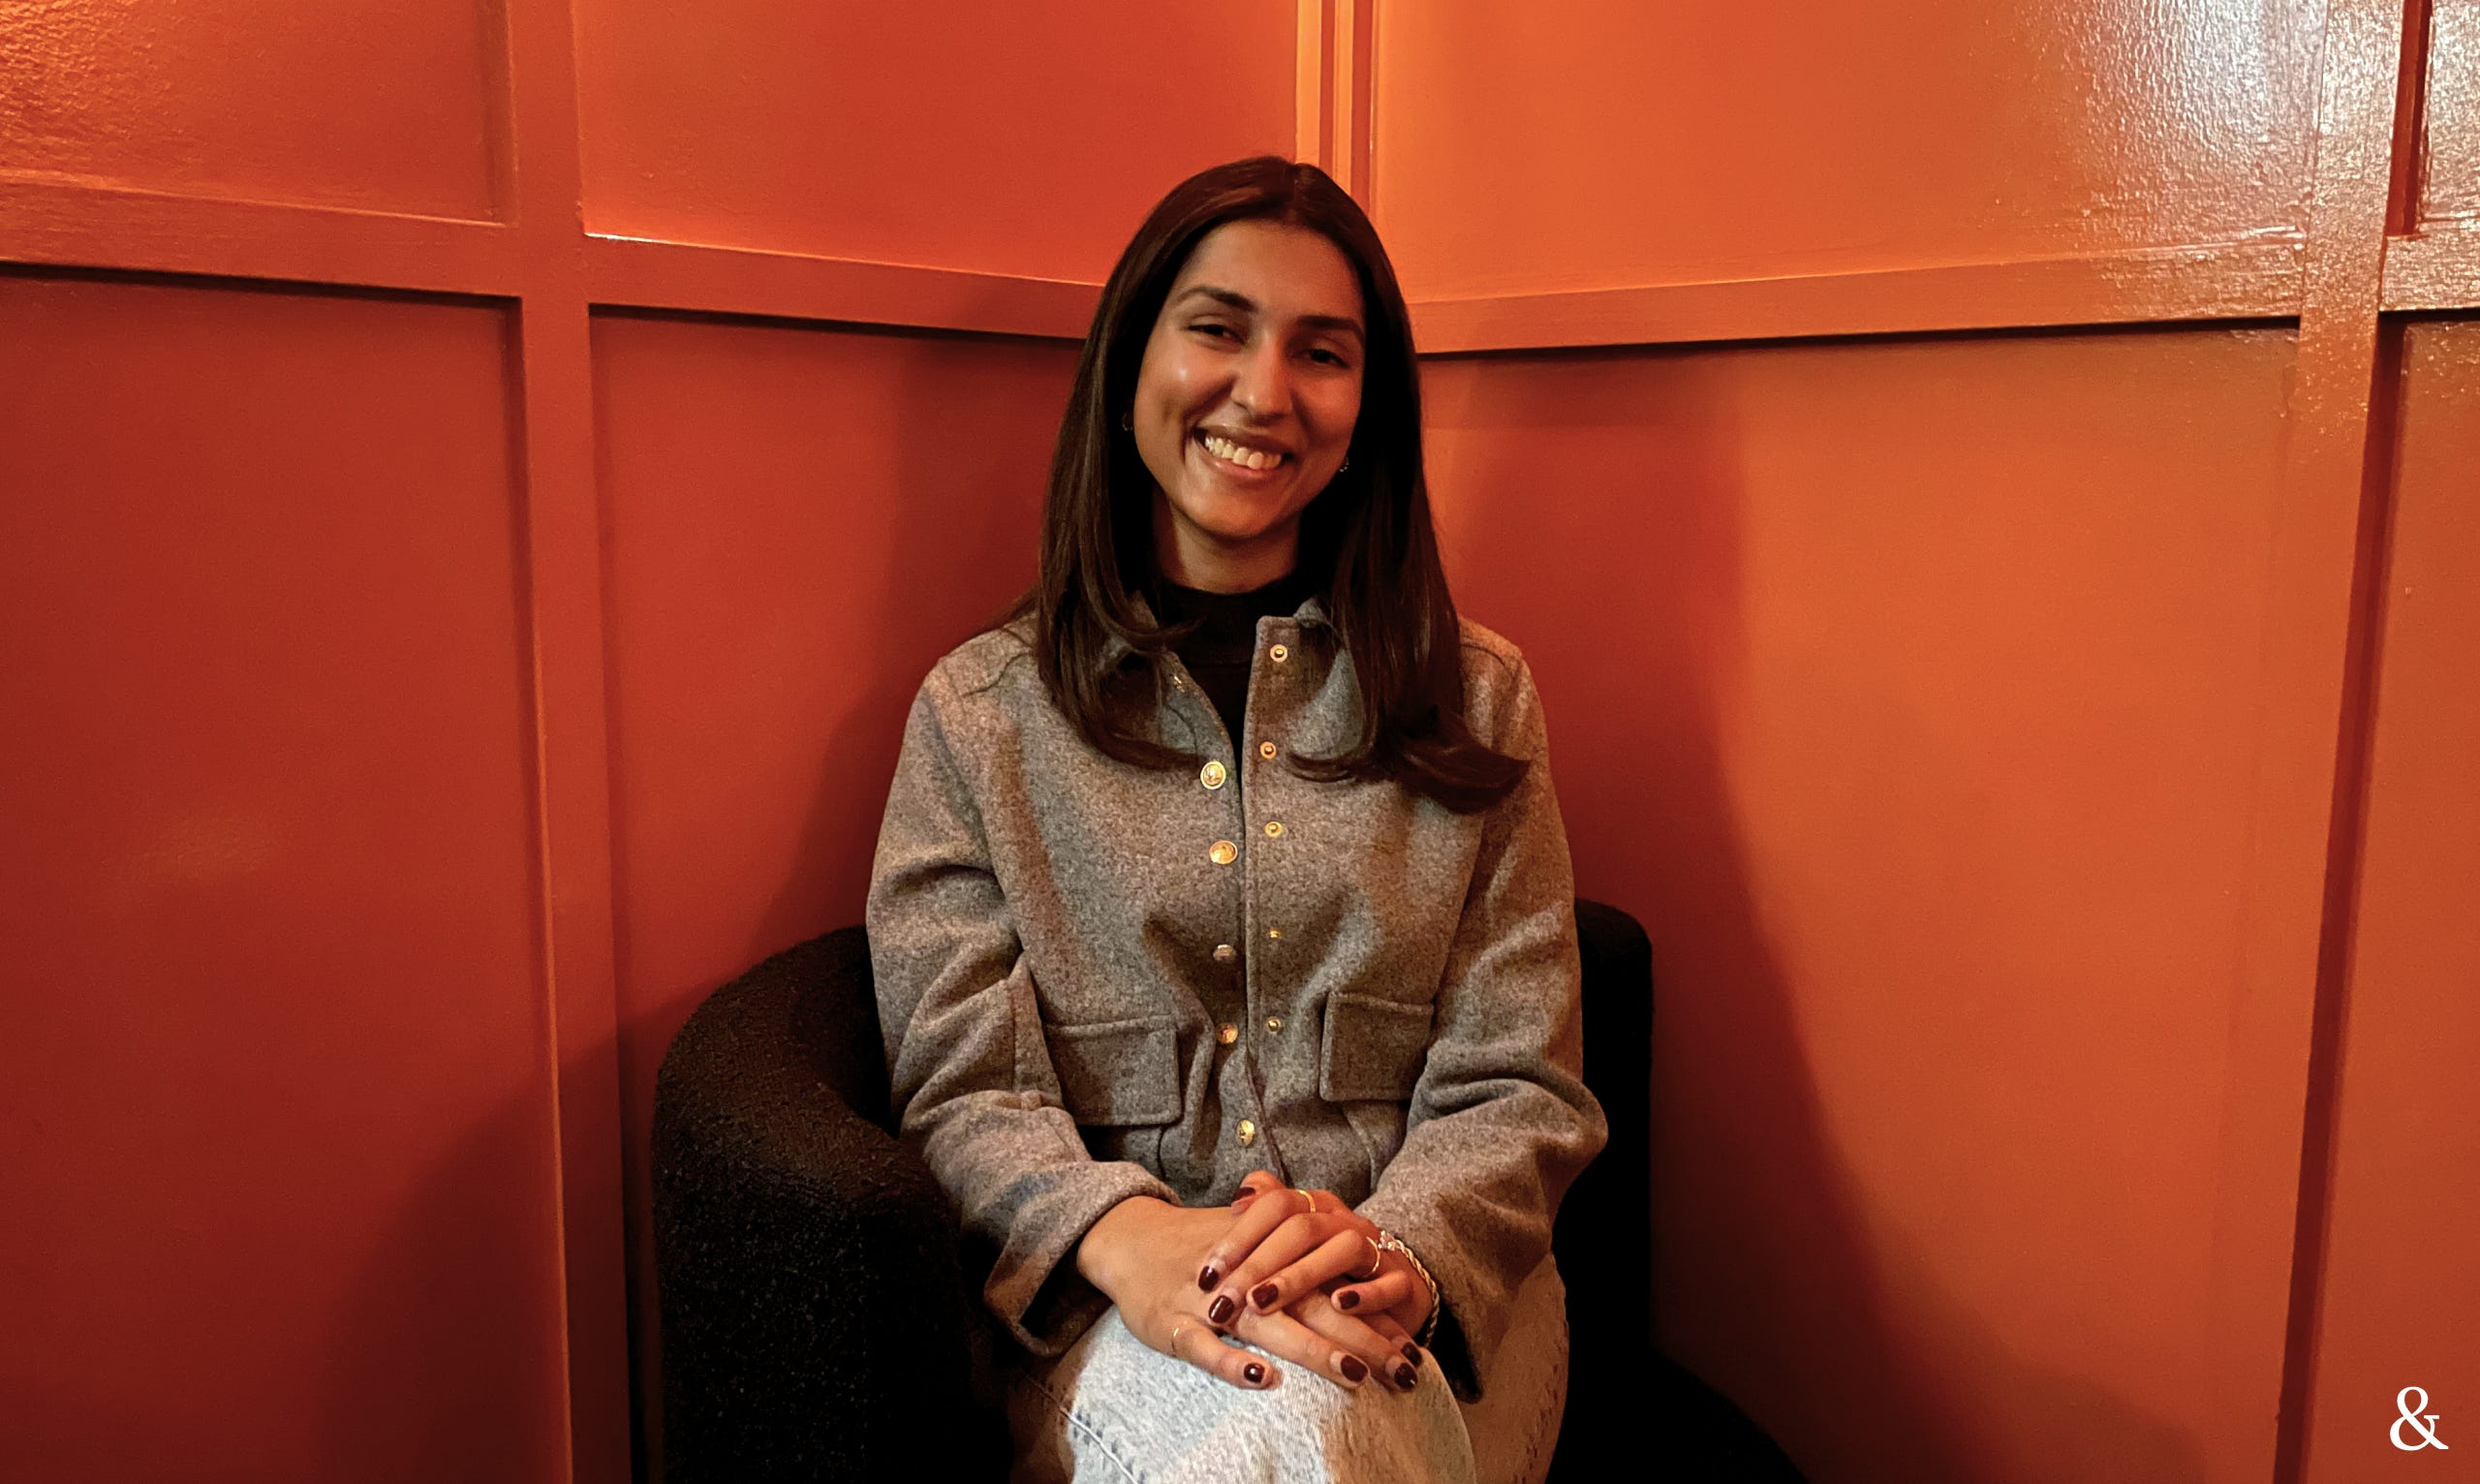 Abi Suresh in a gray jacket sitting and posing facing the camera in front of an orange wall.